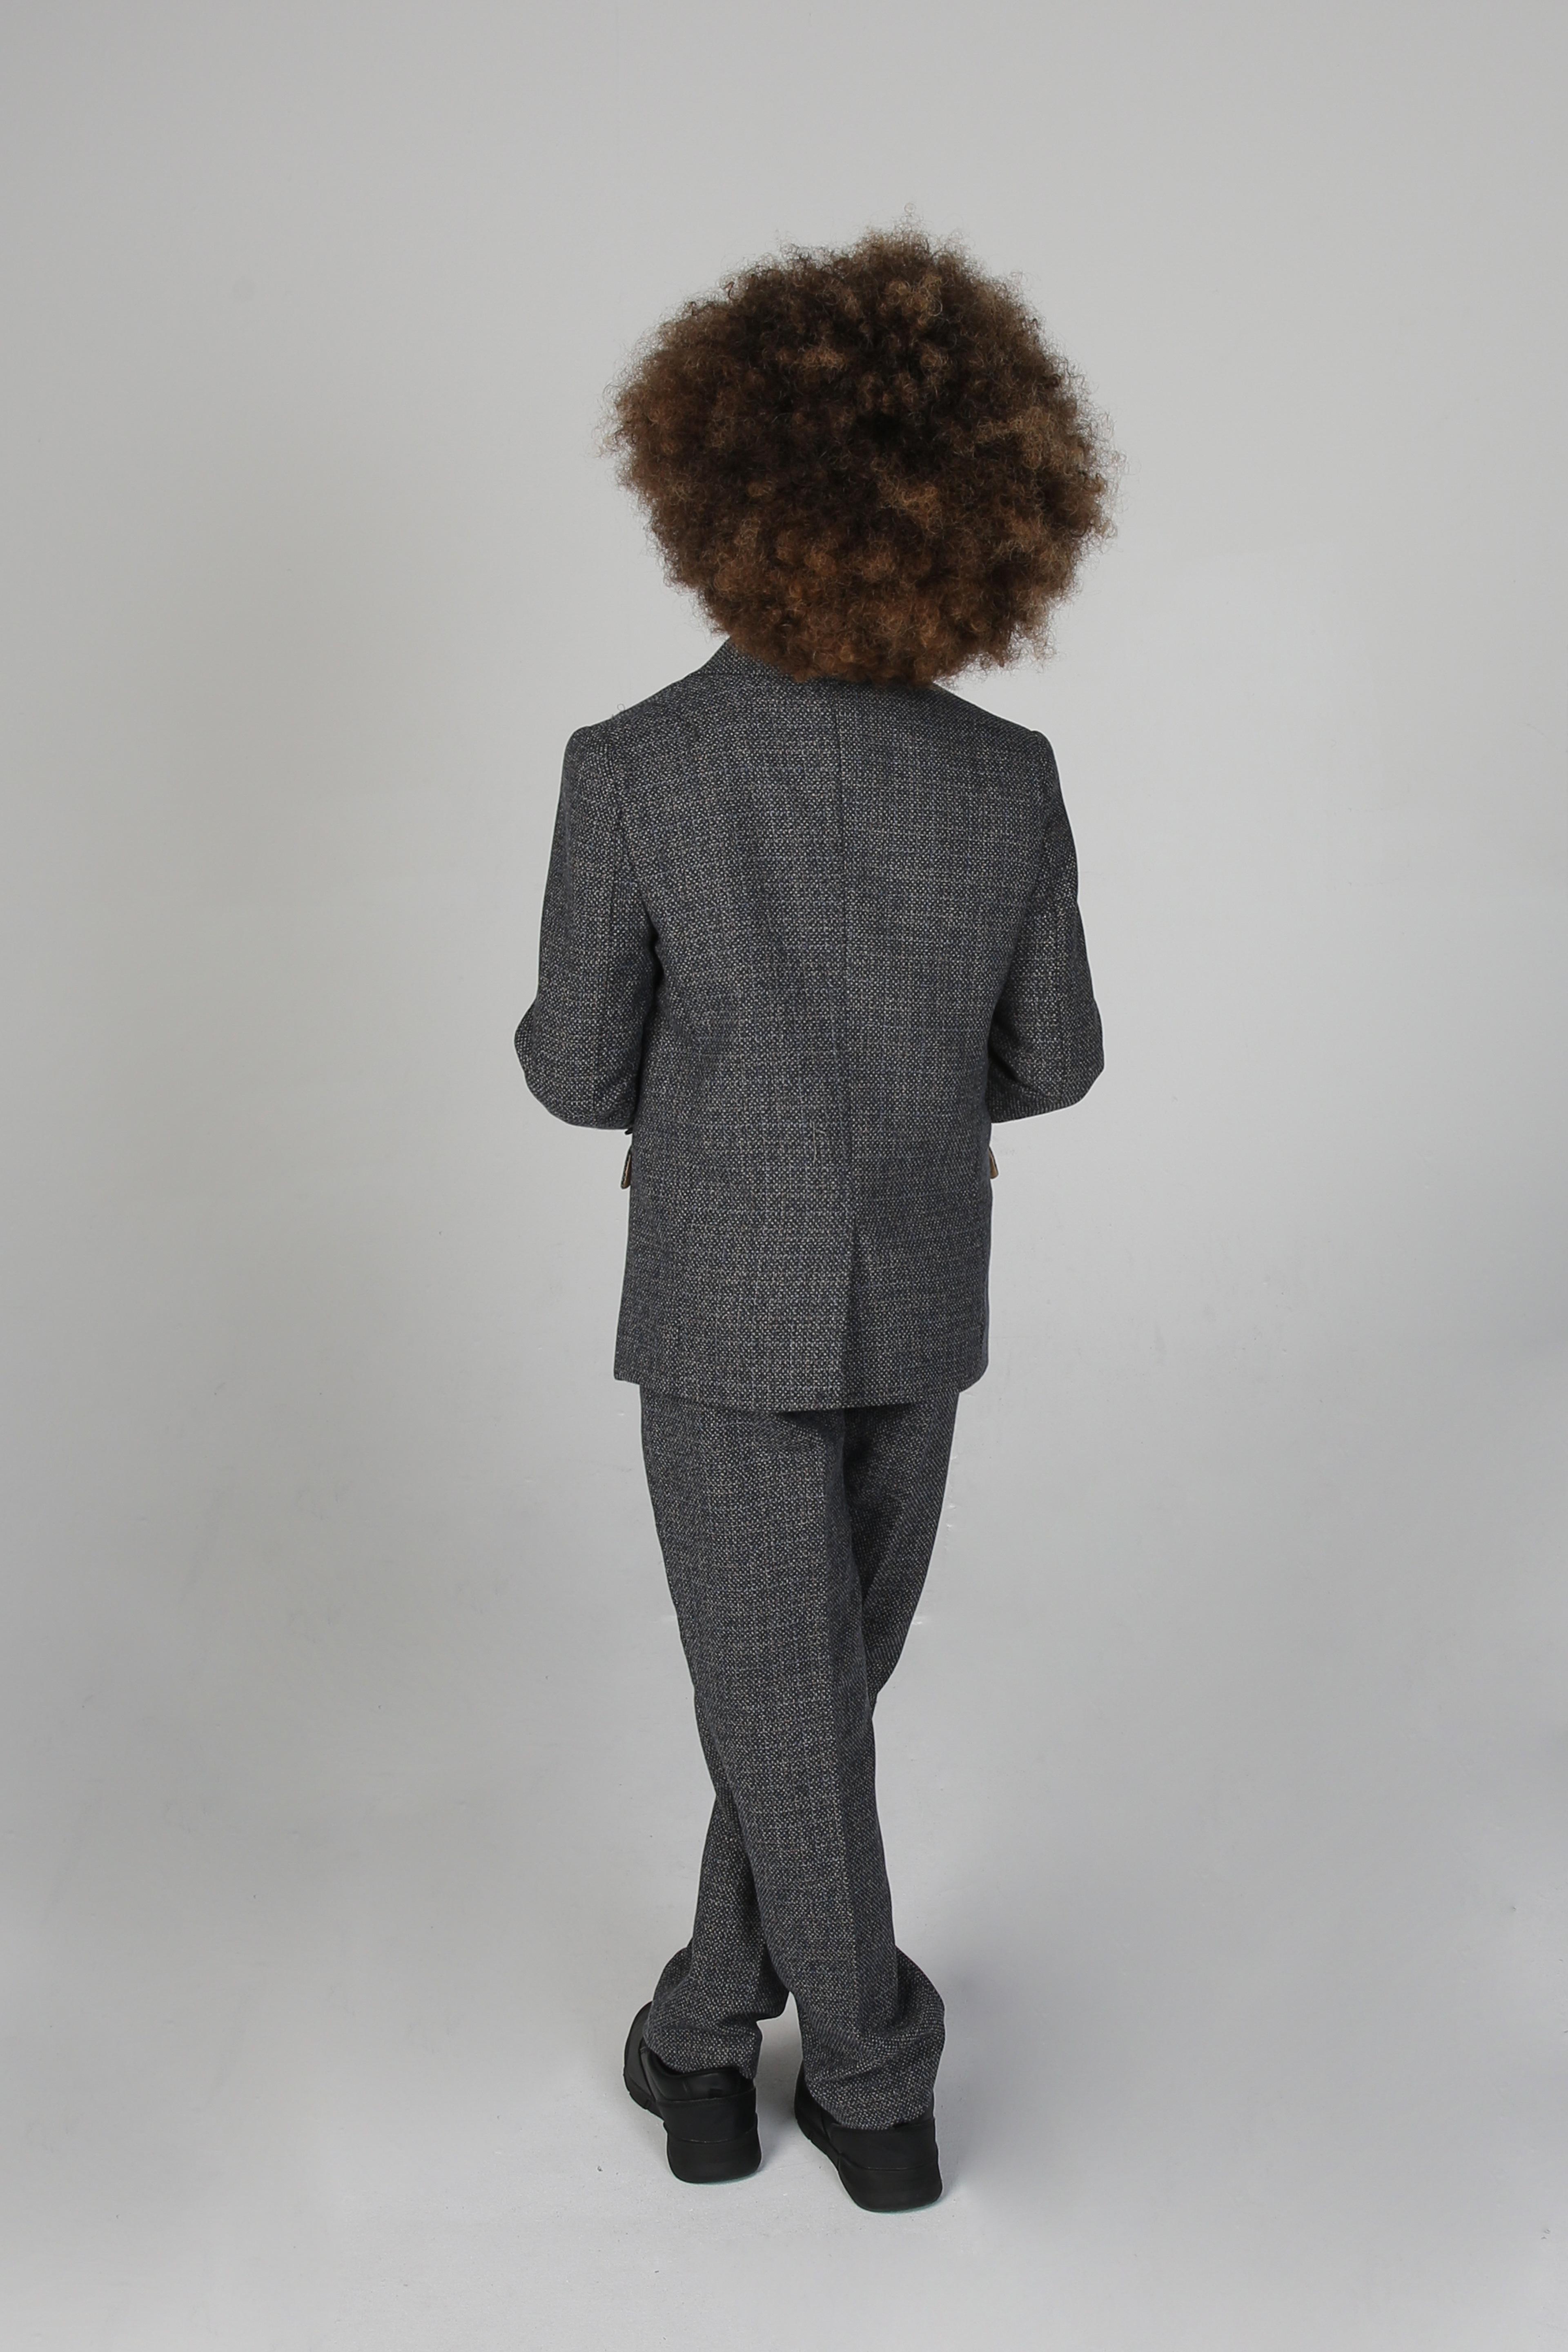 Boys Tweed Tailored Fit Formal Suit - Ralph - Grey - Navy Blue